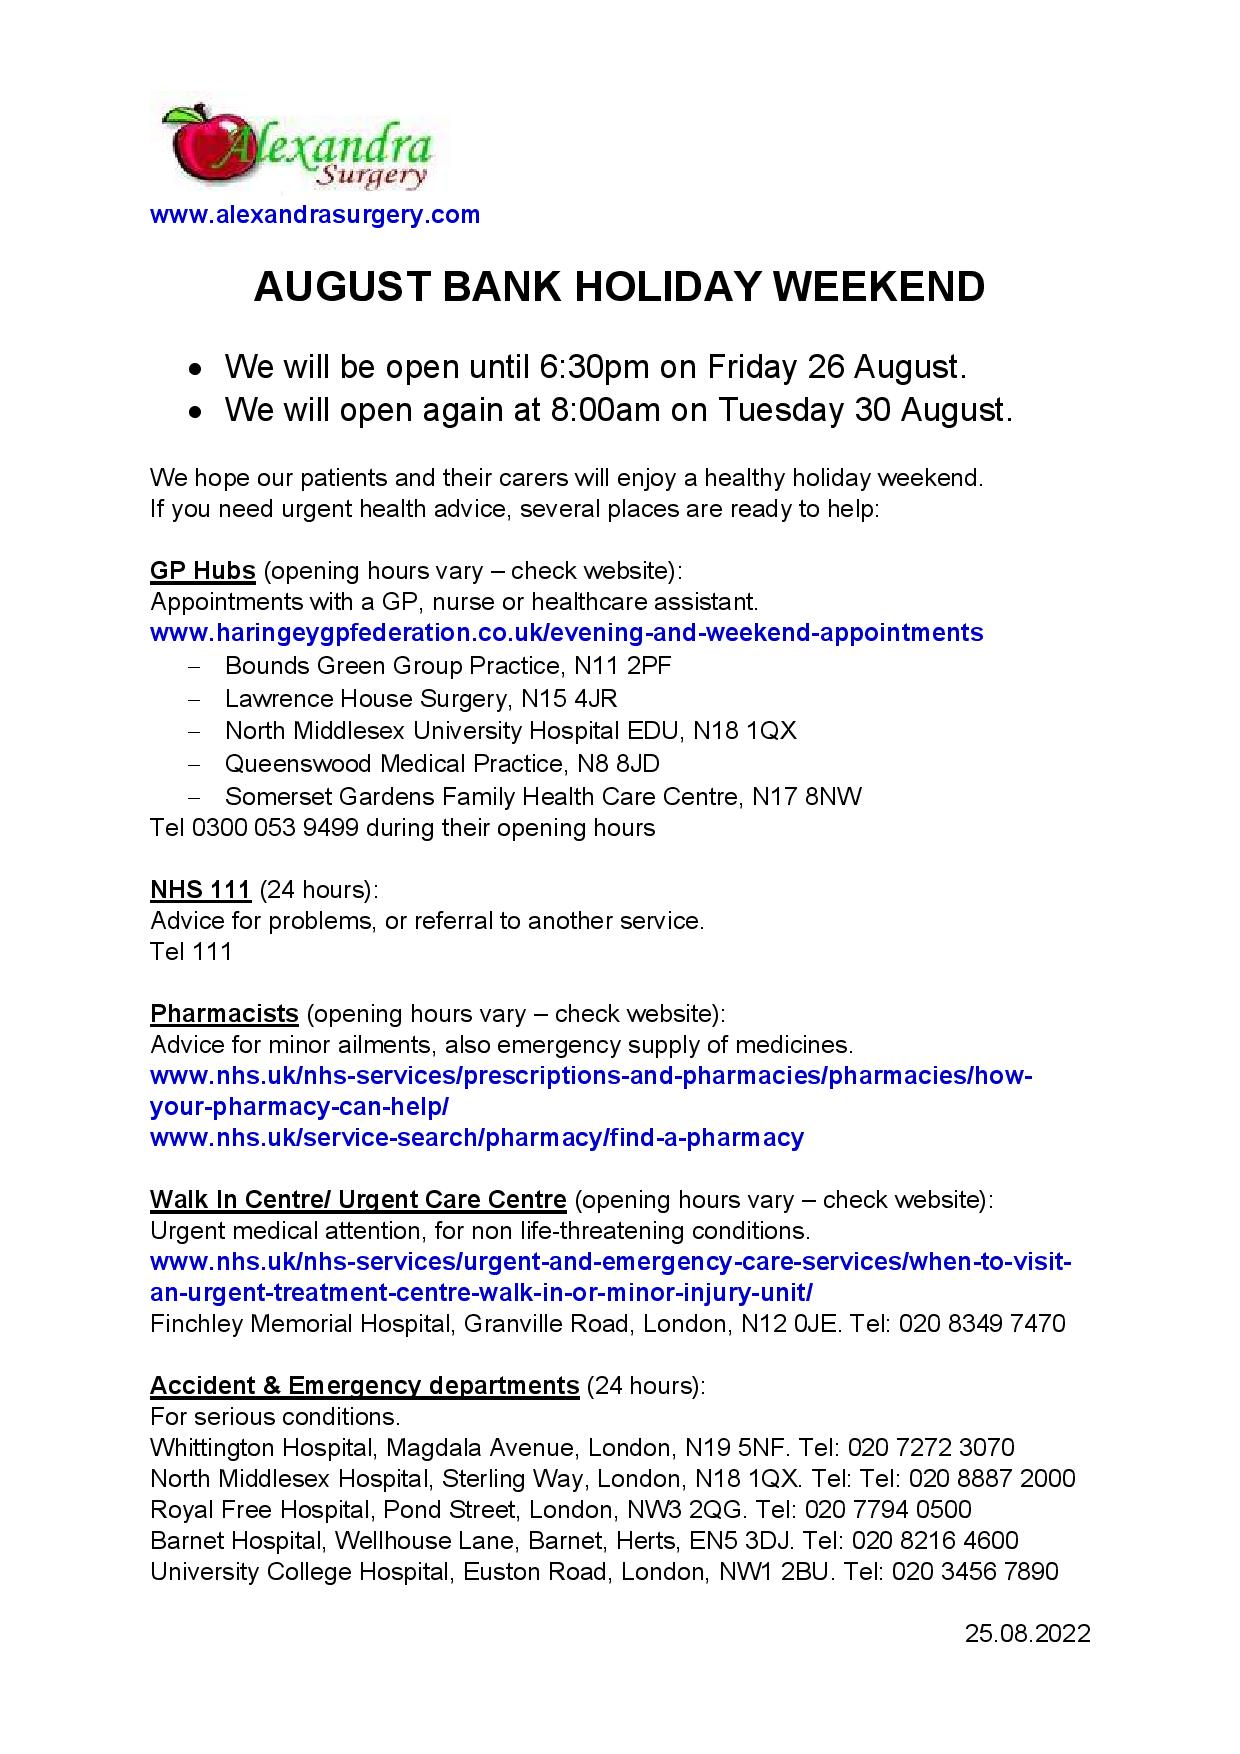 August bank holiday weekend